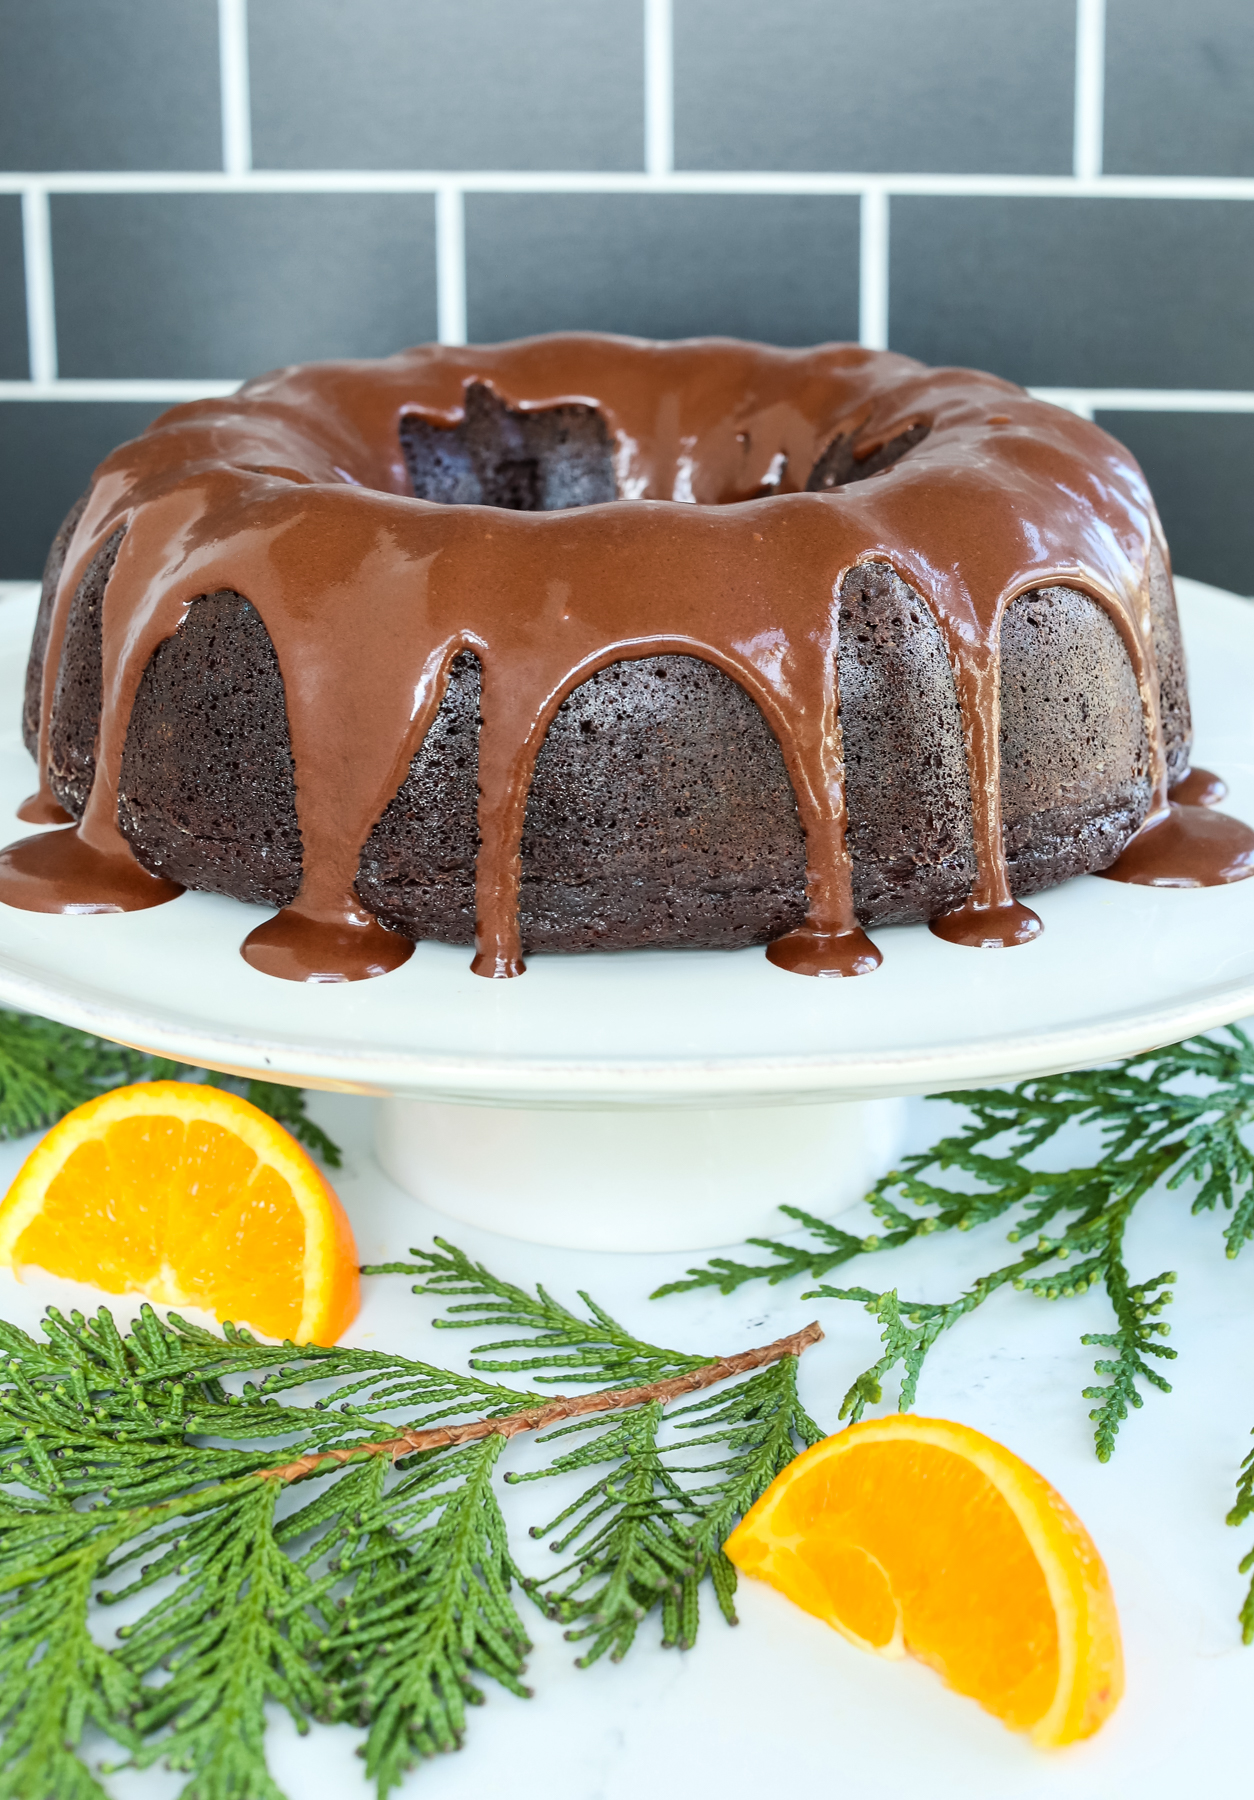 Orange Chocolate Cake on a white stand with chocolate glaze drizzled down the edges. On the table are orange wedges and greenery.